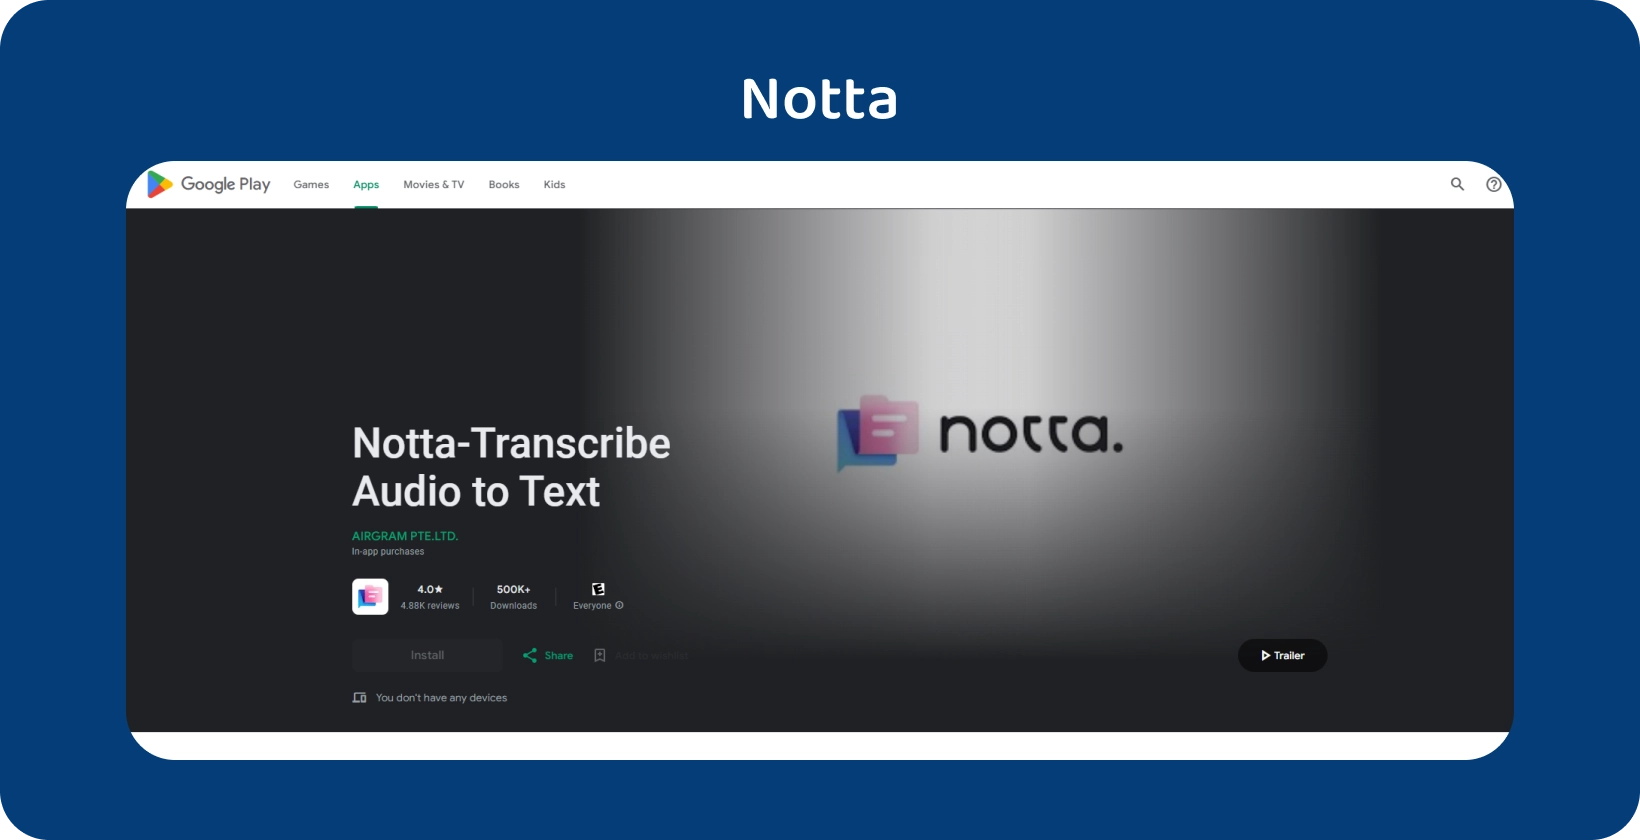 Notta.ai app on Google Play, showcasing its ability to transcribe audio to text accurately on Android.